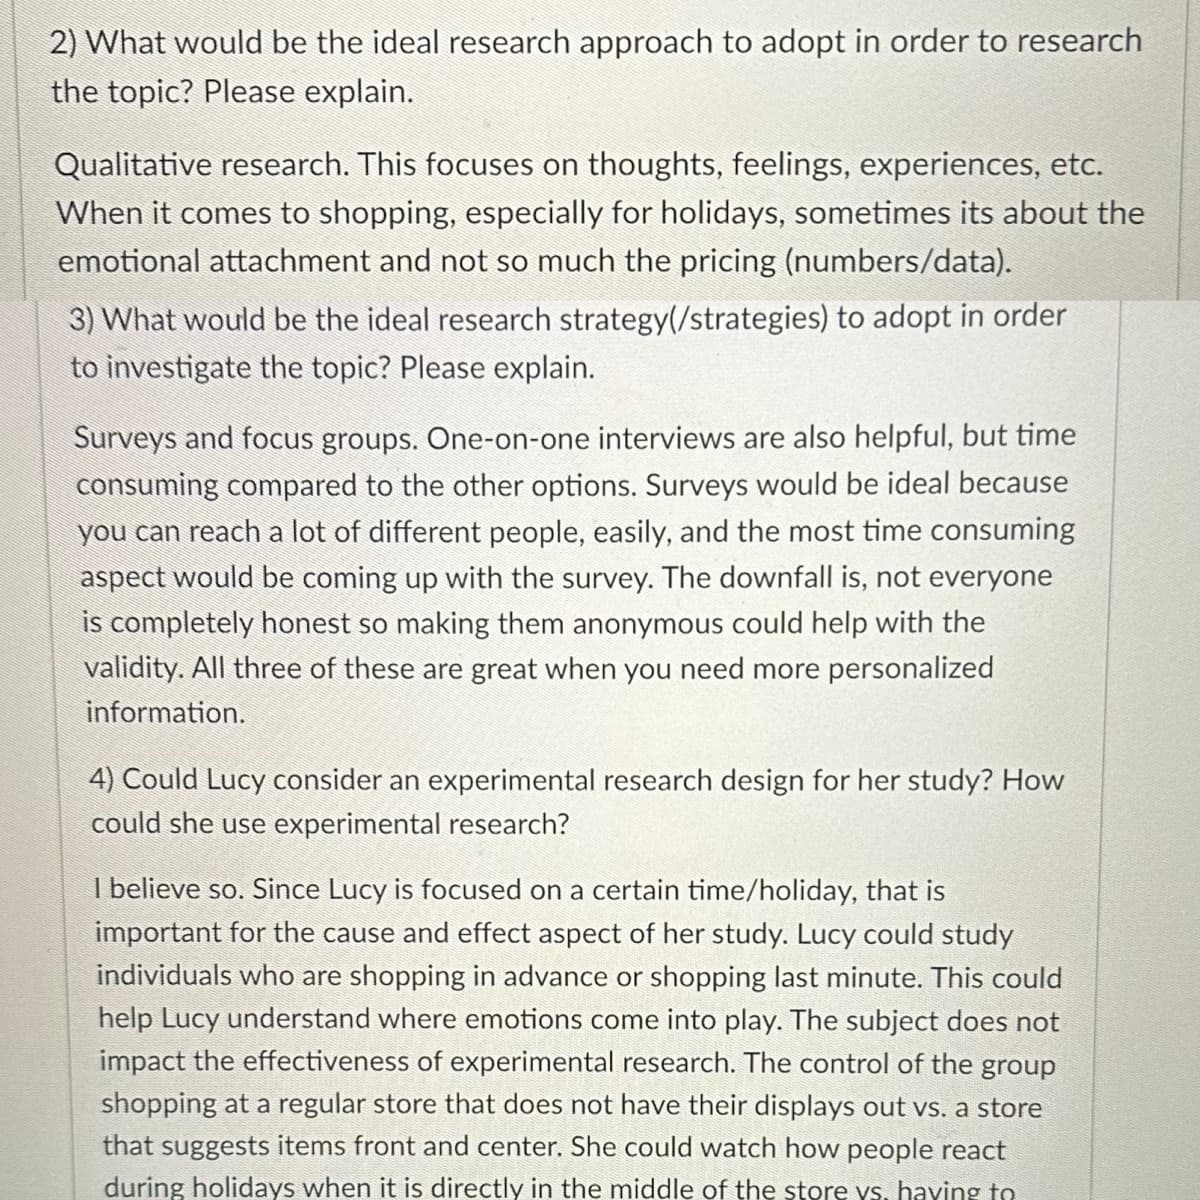 2) What would be the ideal research approach to adopt in order to research
the topic? Please explain.
Qualitative research. This focuses on thoughts, feelings, experiences, etc.
When it comes to shopping, especially for holidays, sometimes its about the
emotional attachment and not so much the pricing (numbers/data).
3) What would be the ideal research strategy (/strategies) to adopt in order
to investigate the topic? Please explain.
Surveys and focus groups. One-on-one interviews are also helpful, but time
consuming compared to the other options. Surveys would be ideal because
you can reach a lot of different people, easily, and the most time consuming
aspect would be coming up with the survey. The downfall is, not everyone
is completely honest so making them anonymous could help with the
validity. All three of these are great when you need more personalized
information.
4) Could Lucy consider an experimental research design for her study? How
could she use experimental research?
I believe so. Since Lucy is focused on a certain time/holiday, that is
important for the cause and effect aspect of her study. Lucy could study
individuals who are shopping in advance or shopping last minute. This could
help Lucy understand where emotions come into play. The subject does not
impact the effectiveness of experimental research. The control of the group
shopping at a regular store that does not have their displays out vs. a store
that suggests items front and center. She could watch how people react
during holidays when it is directly in the middle of the store ys, haying to